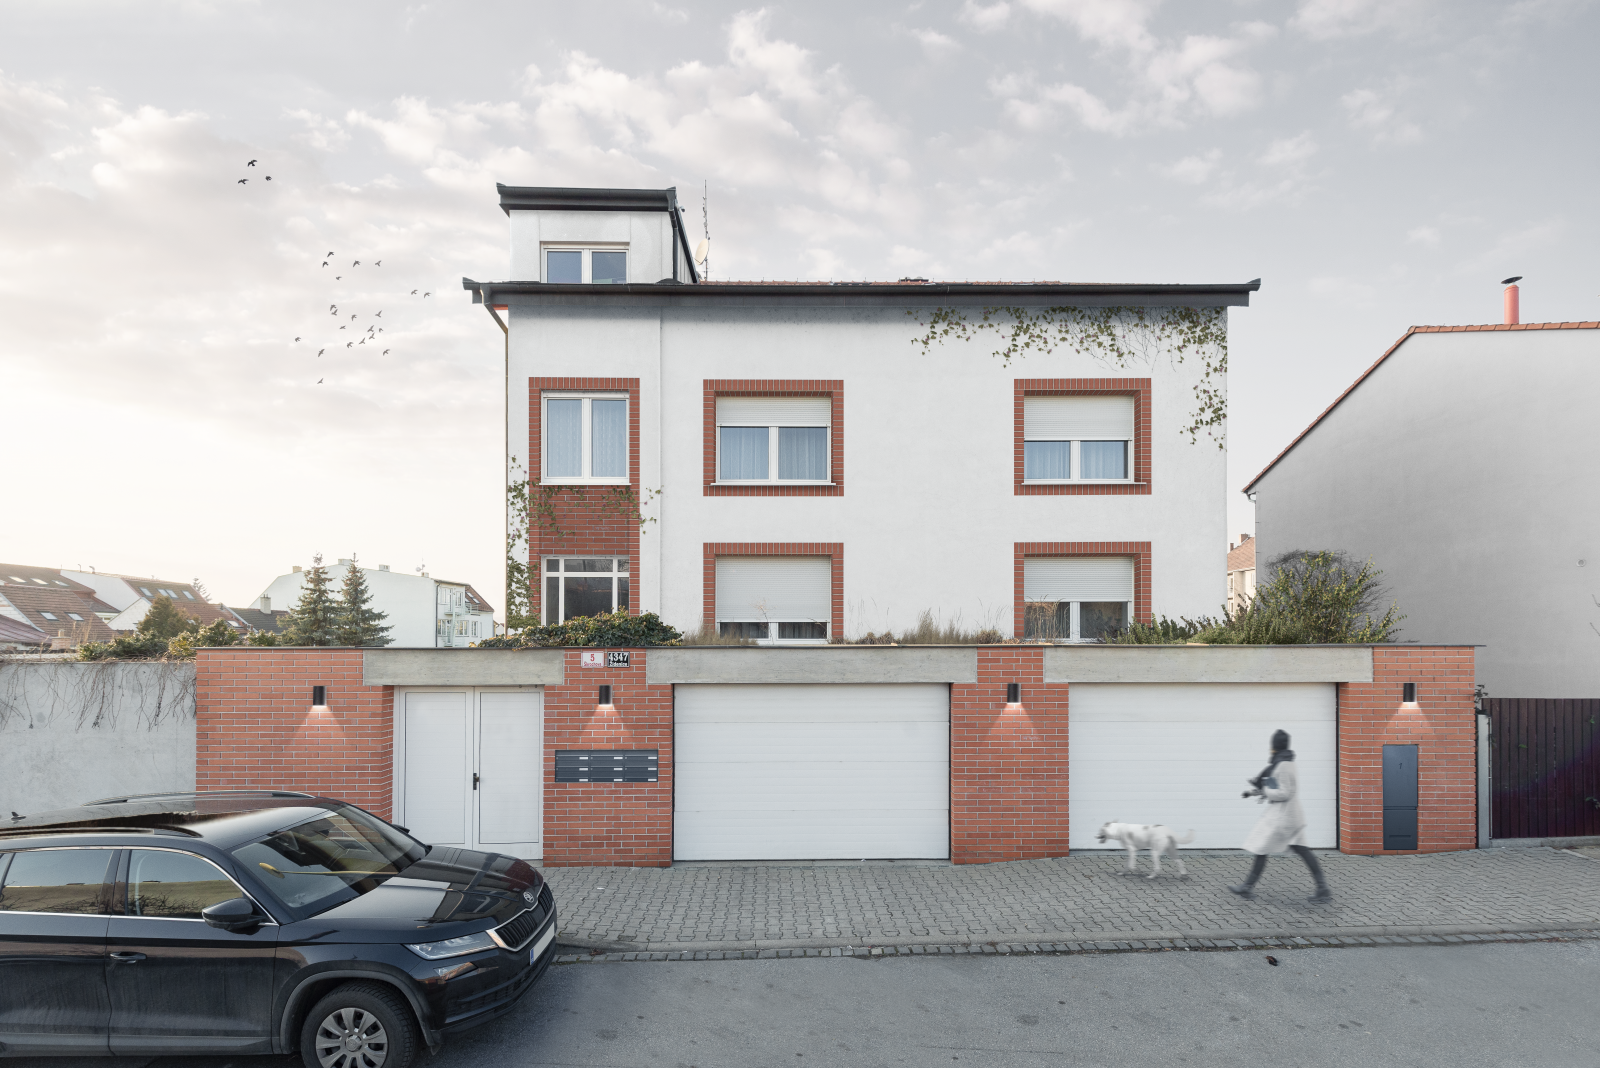 Reconversion to an Apartment Building | Brno - Židenice